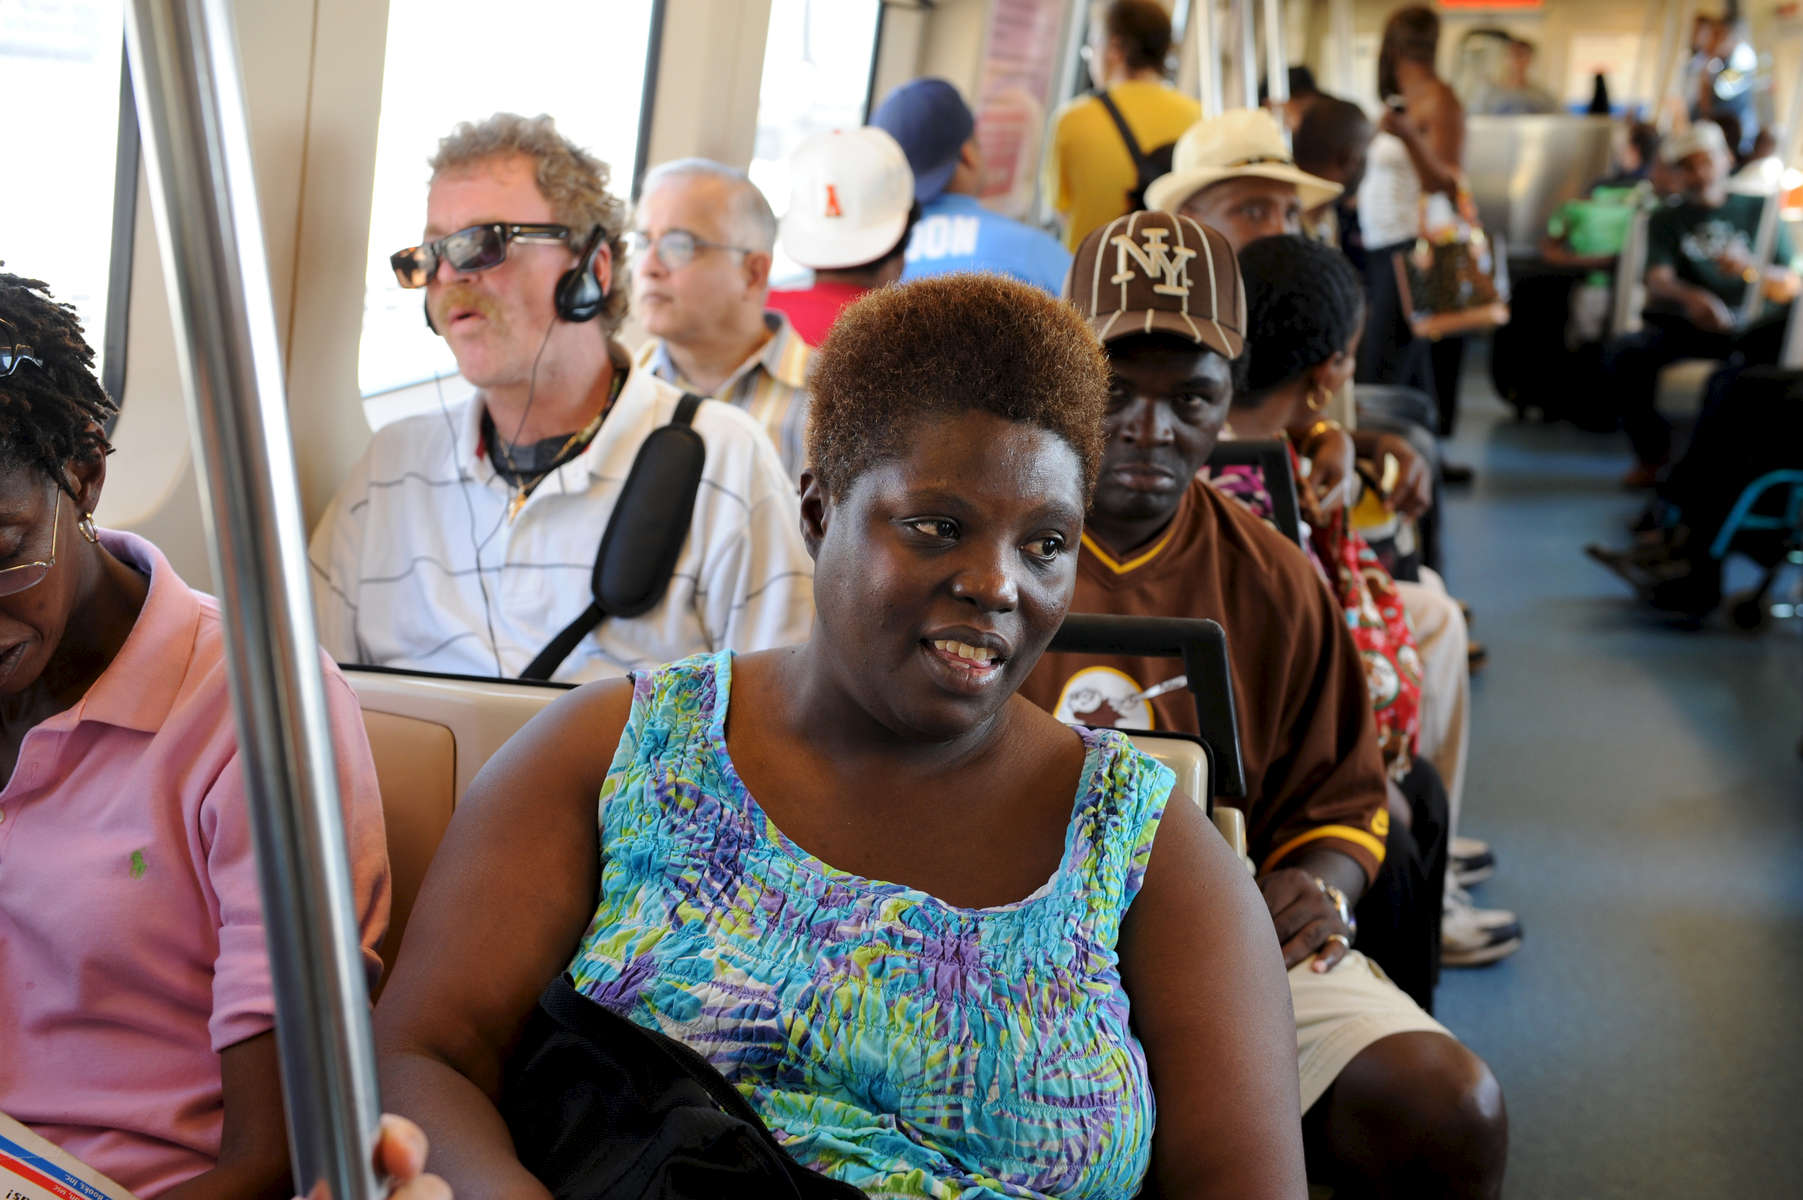 Decatur GA -- Lois Curtis rides MARTA rapid transit train with friends from Peer Center to book fair on the town square. 